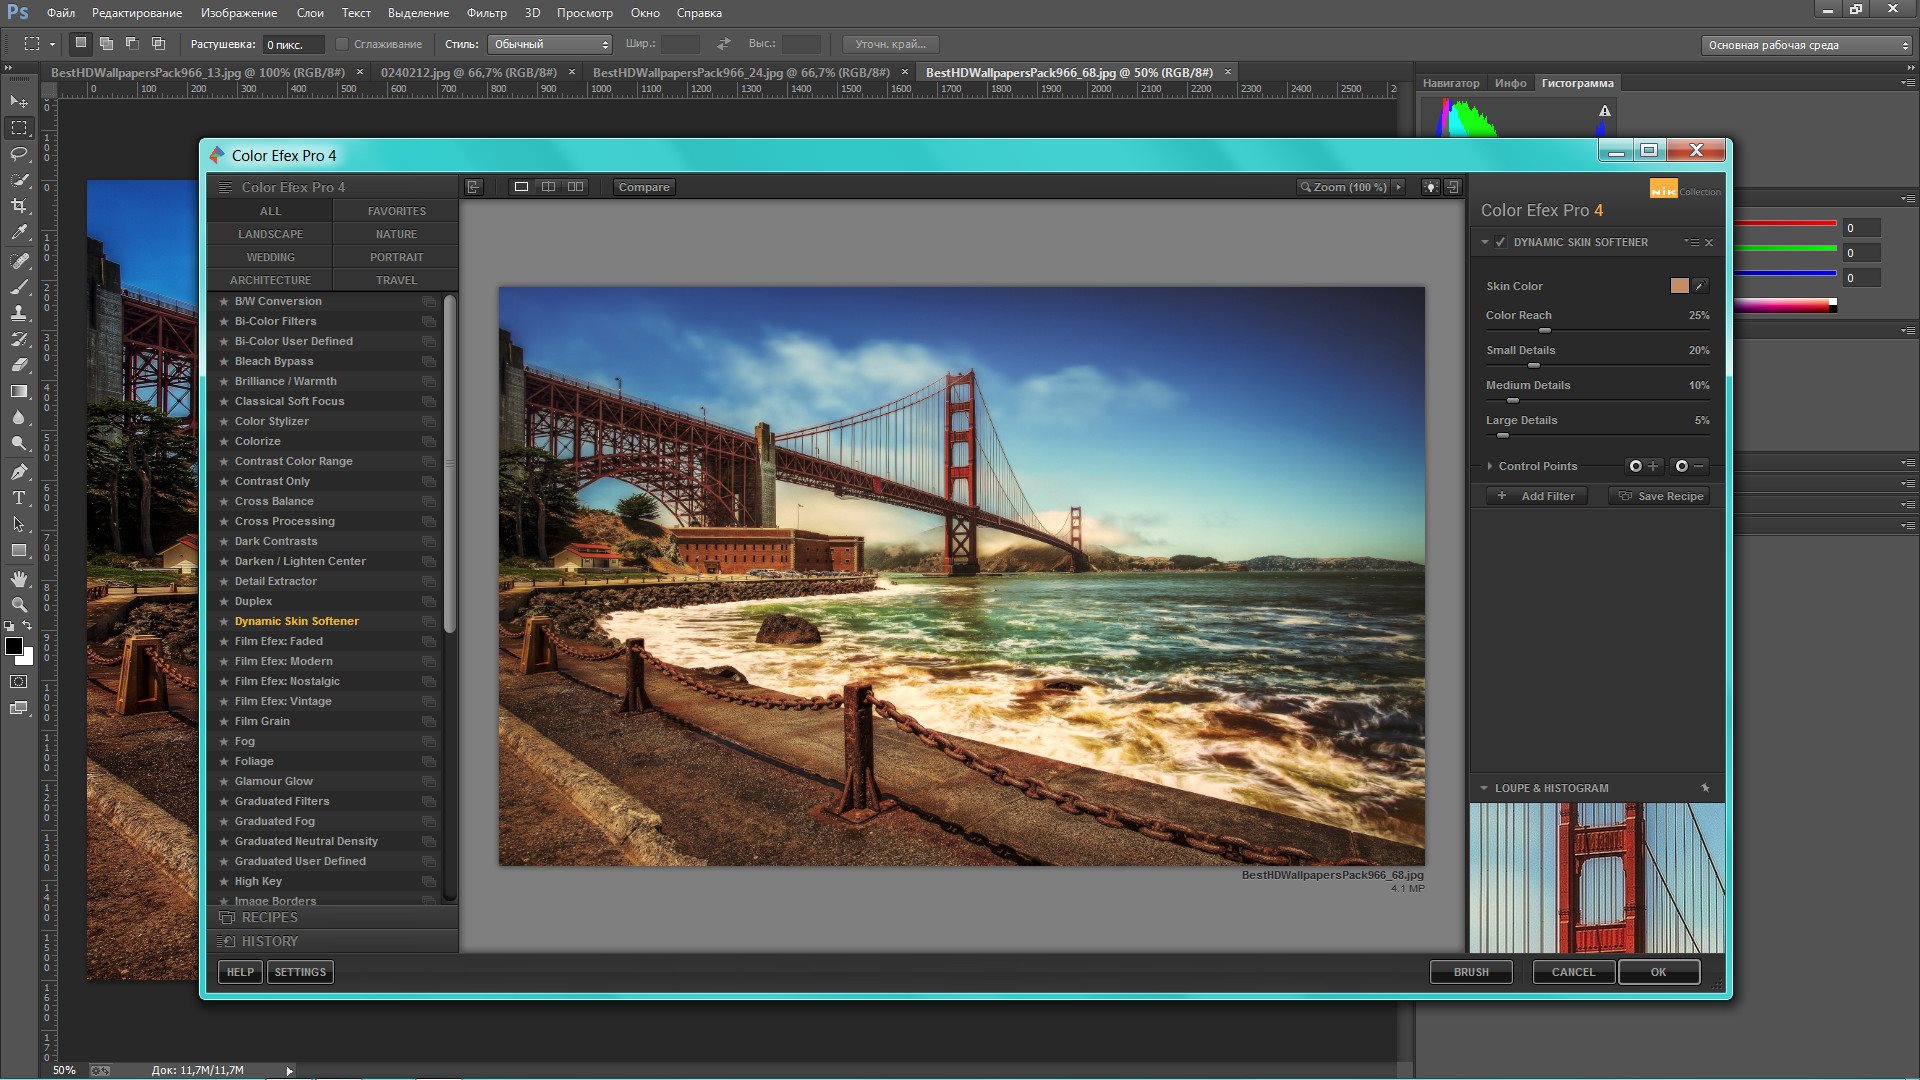 adobe photoshop 2014 free download full version for windows 8